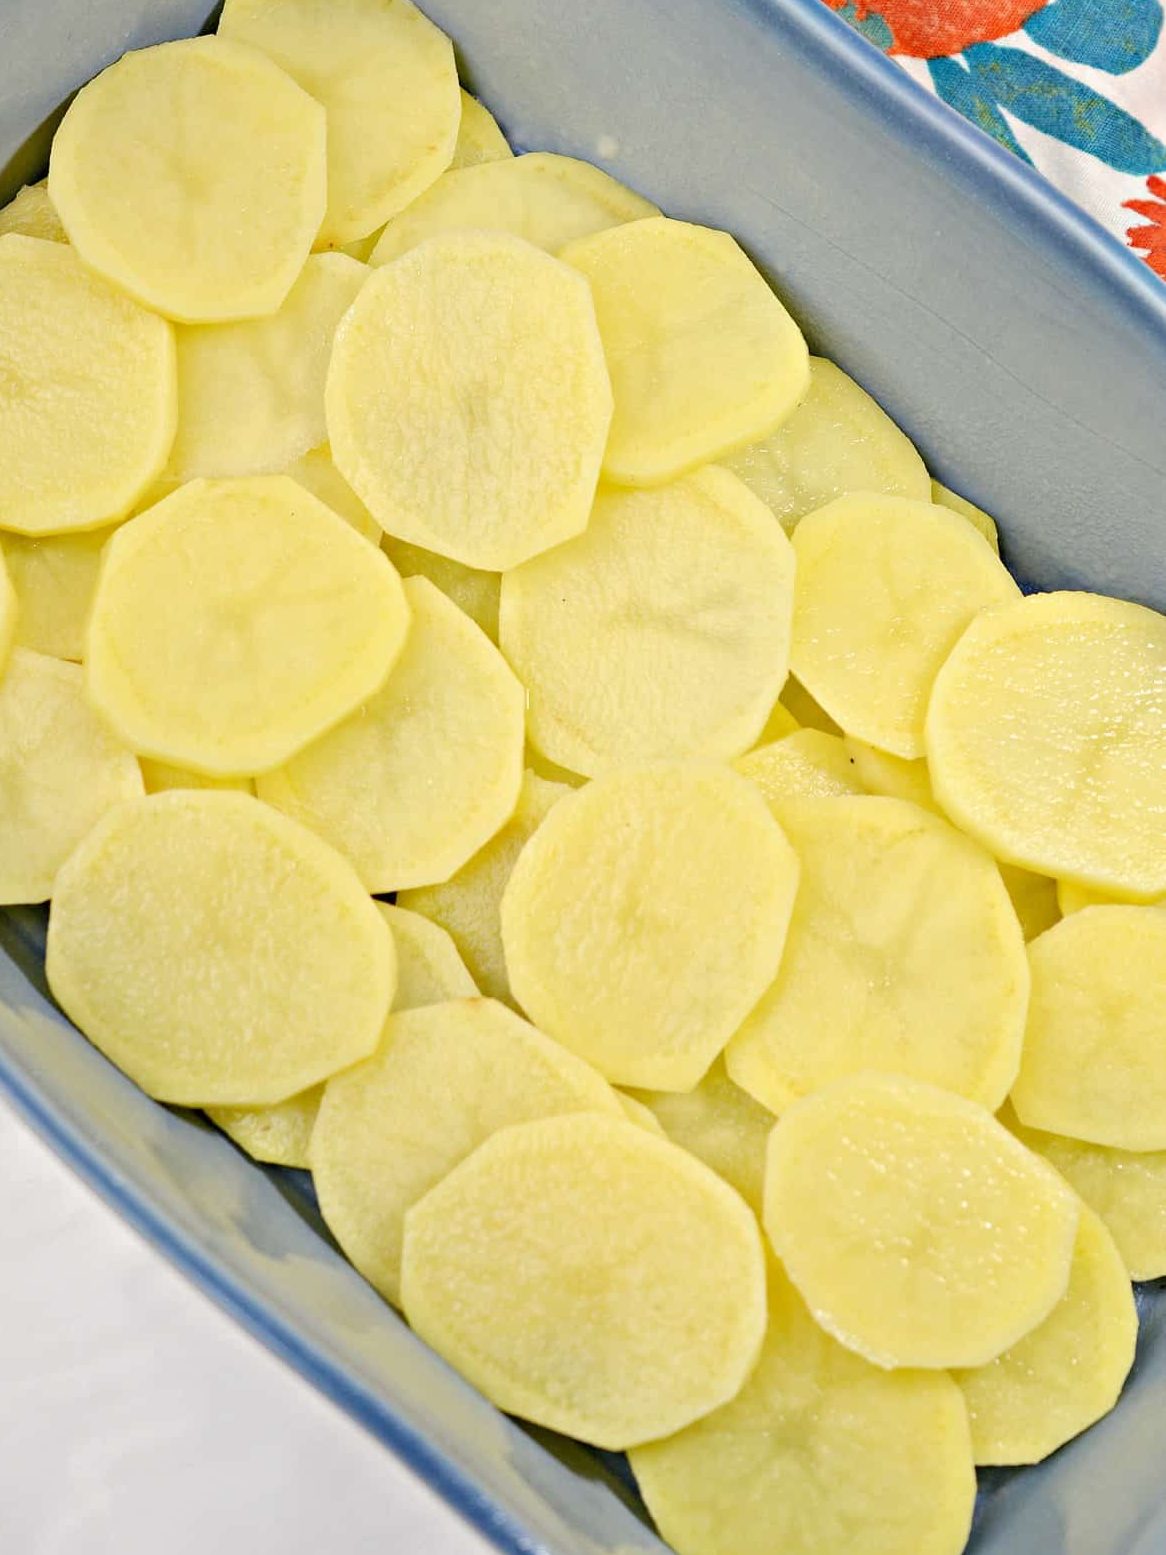 Layer the sliced potatoes on the bottom of a 9x13 baking dish.